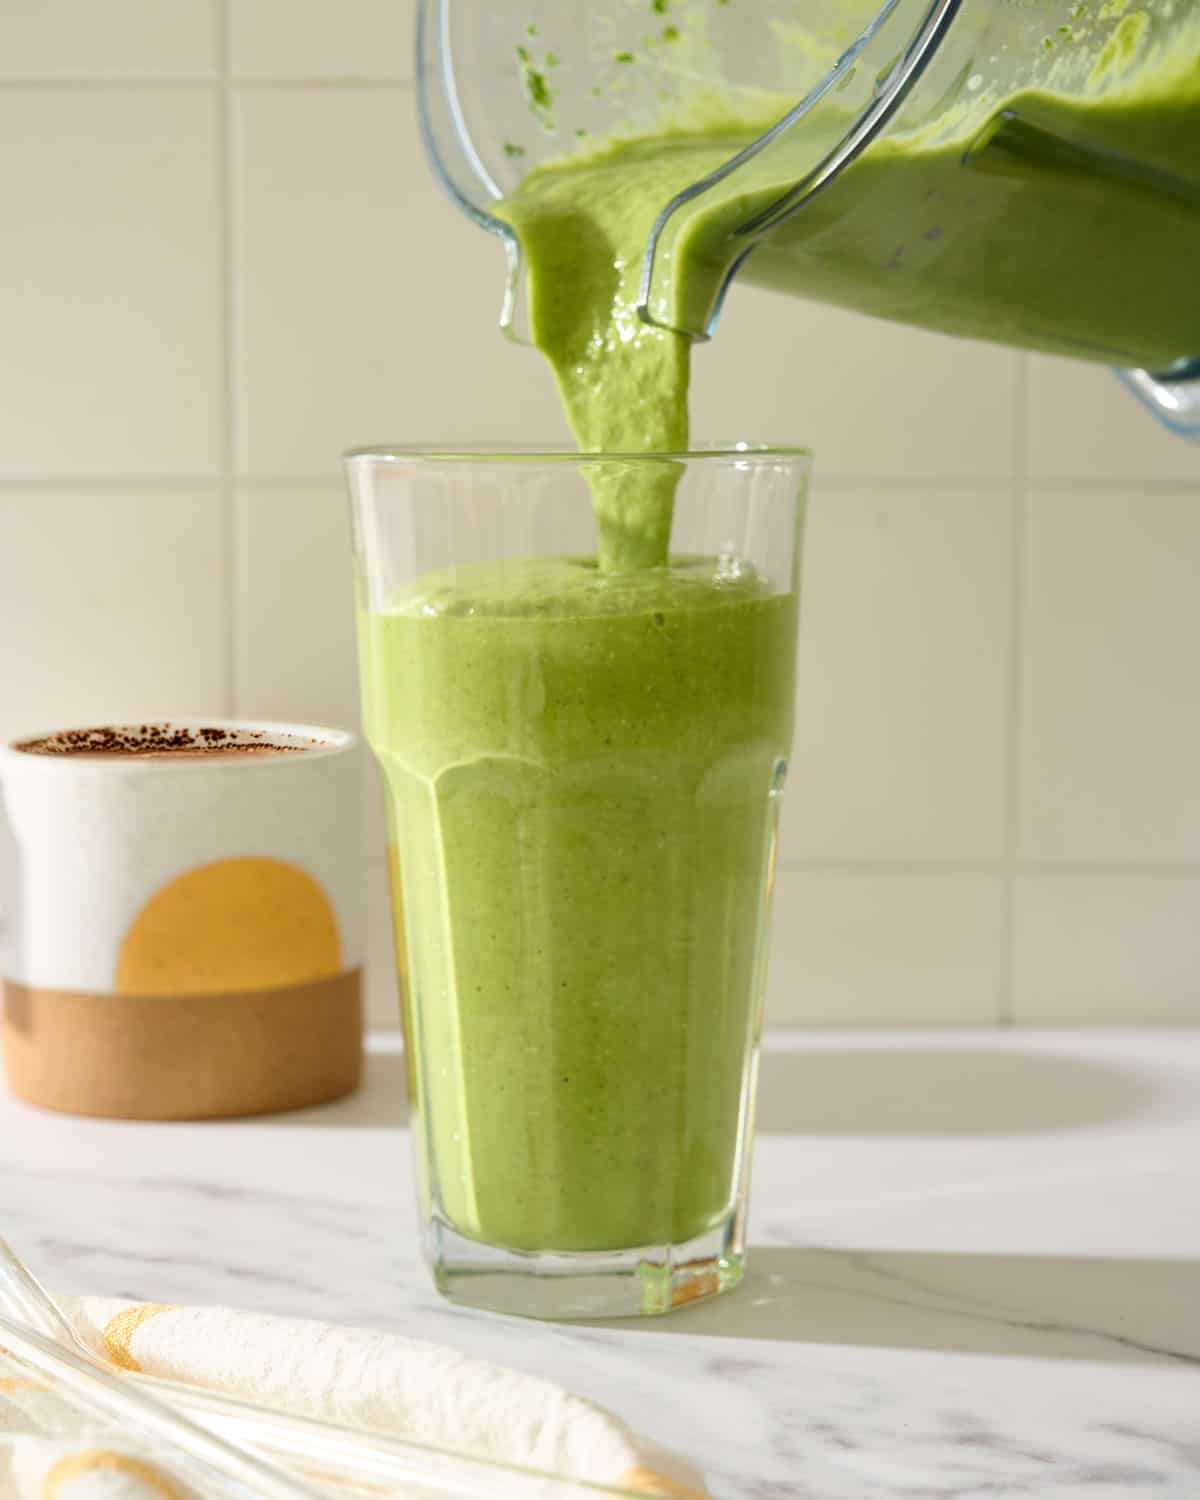 Pouring a green smoothie into glass from a blender pitcher.